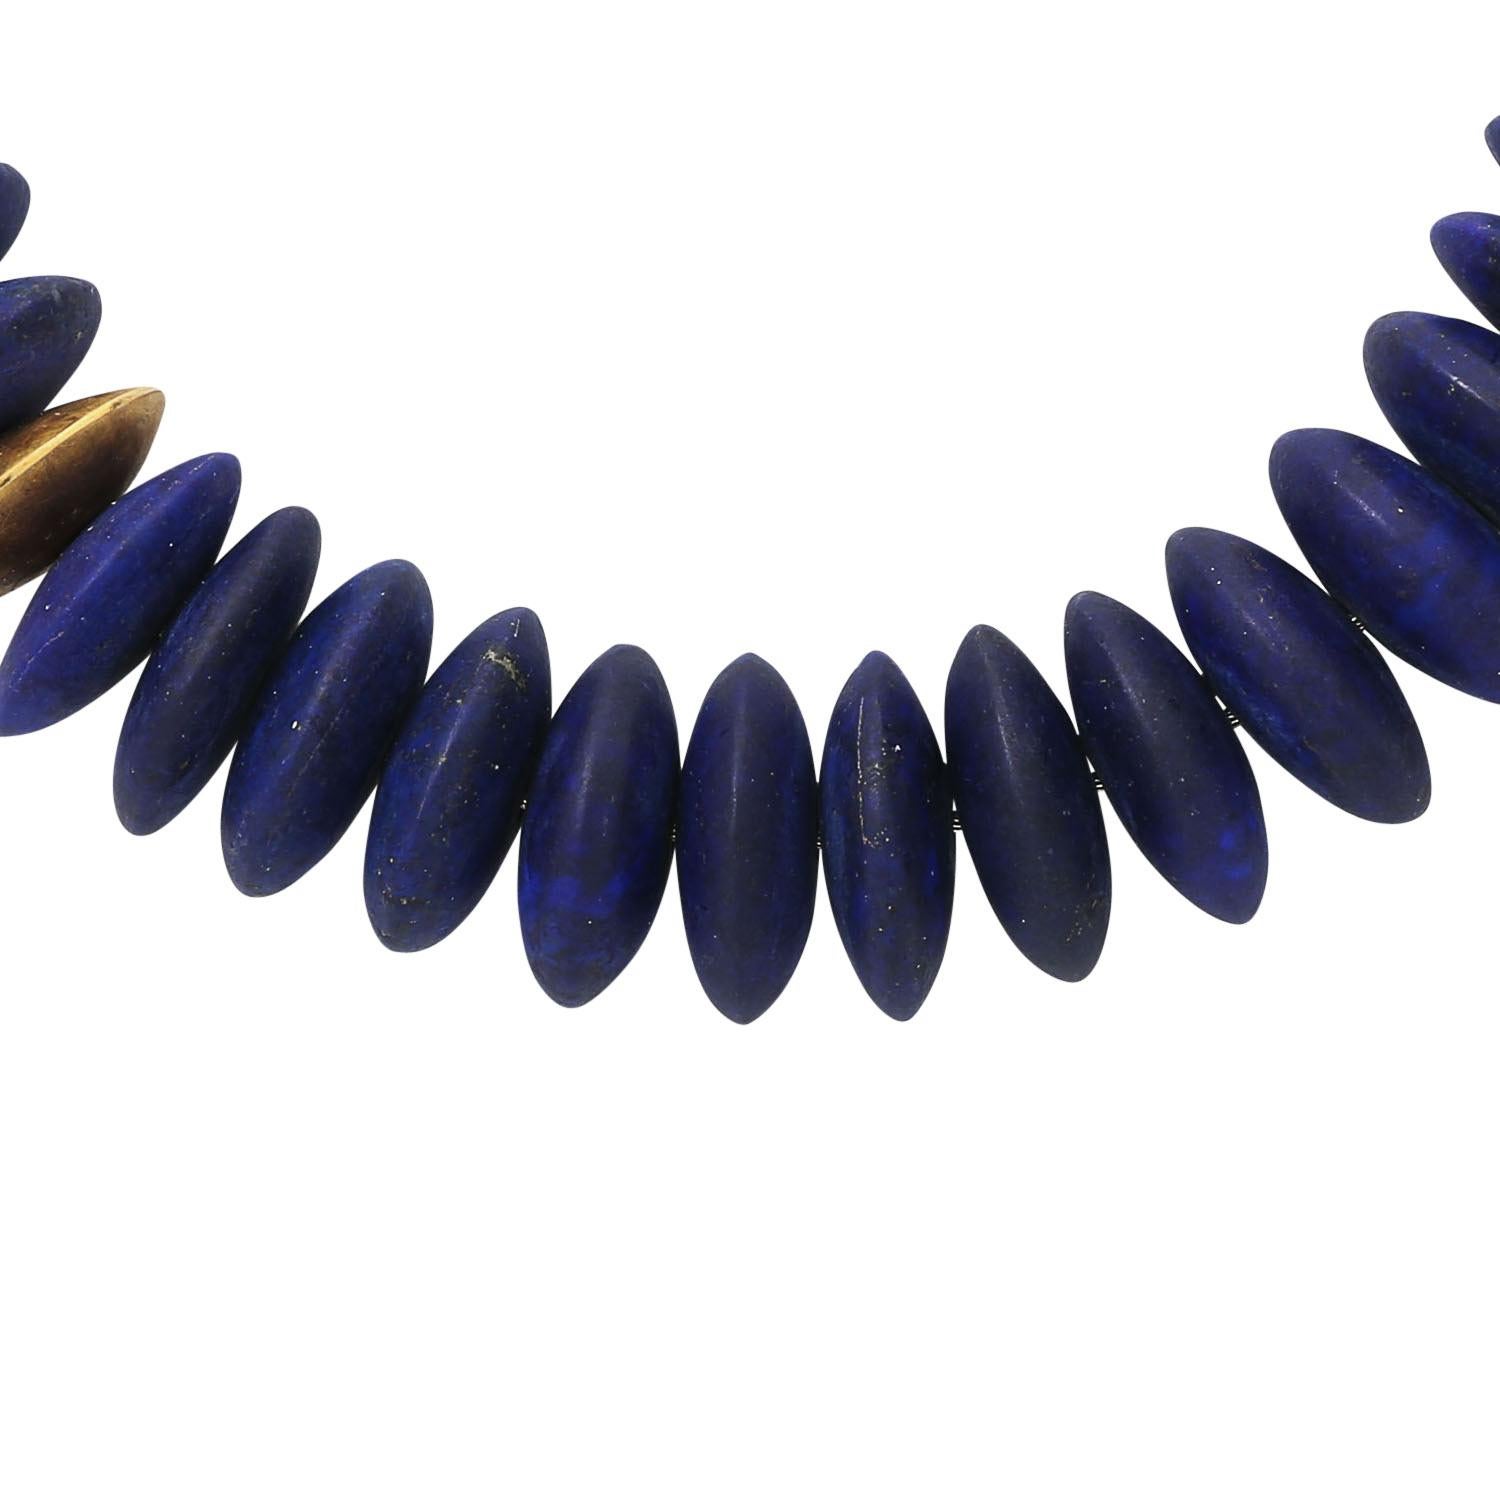 approx. 20x7 mm, with intermediate parts of the same shape made of GG 18K, L: approx. 53 cm, integrated bayonet clasp, 1990s, good condition, one gold lens with dedication engraving, HANDMADE!



Necklace of lapis lazuli, lens shaped, approx. 20x7